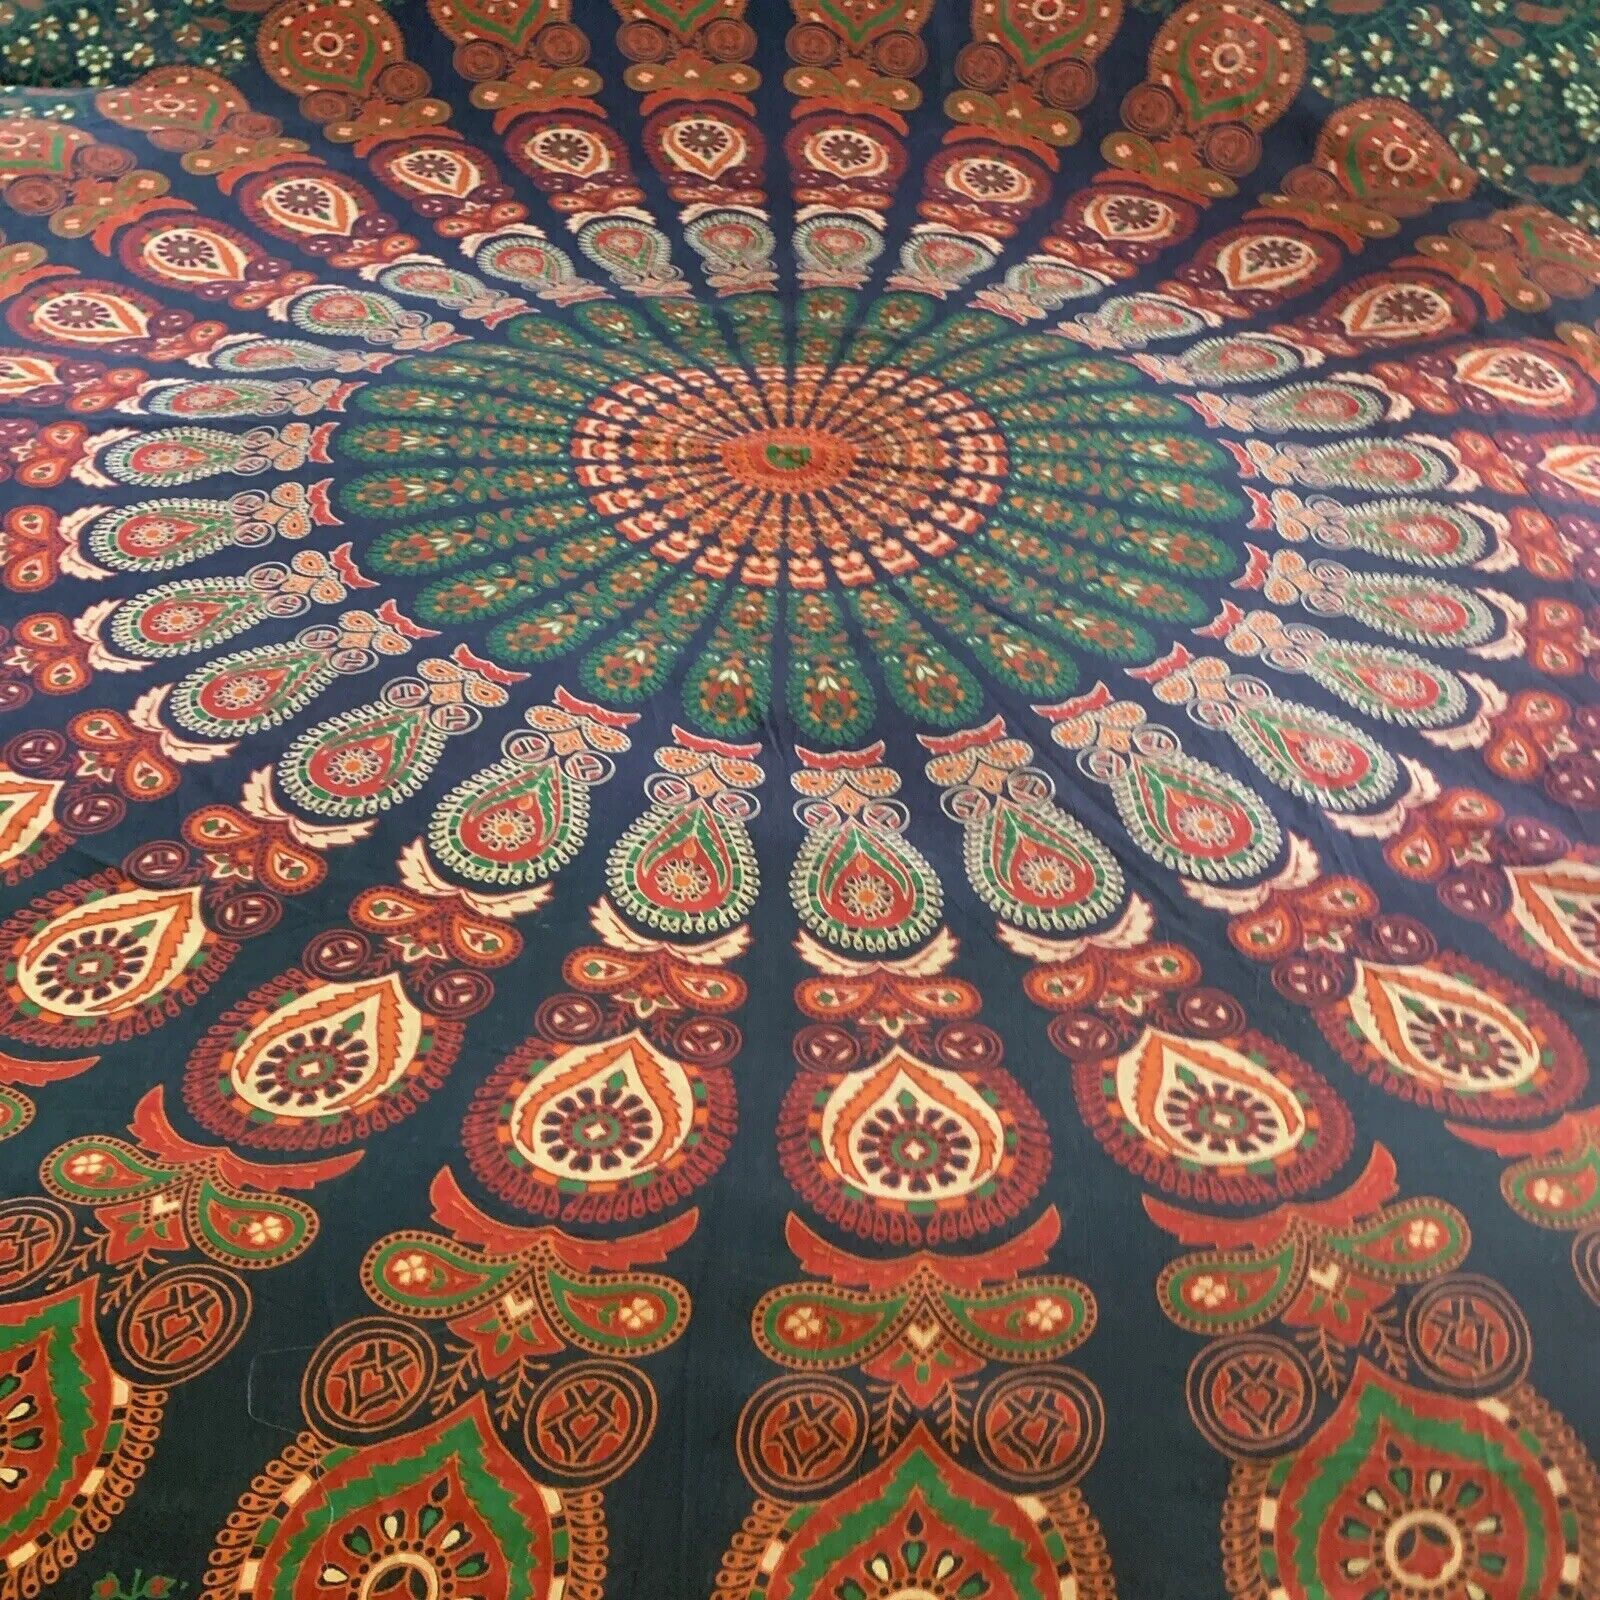 Large Indian Mandala Tapestry Hippie Wall Hanging Throw Bedspread 90 X 80